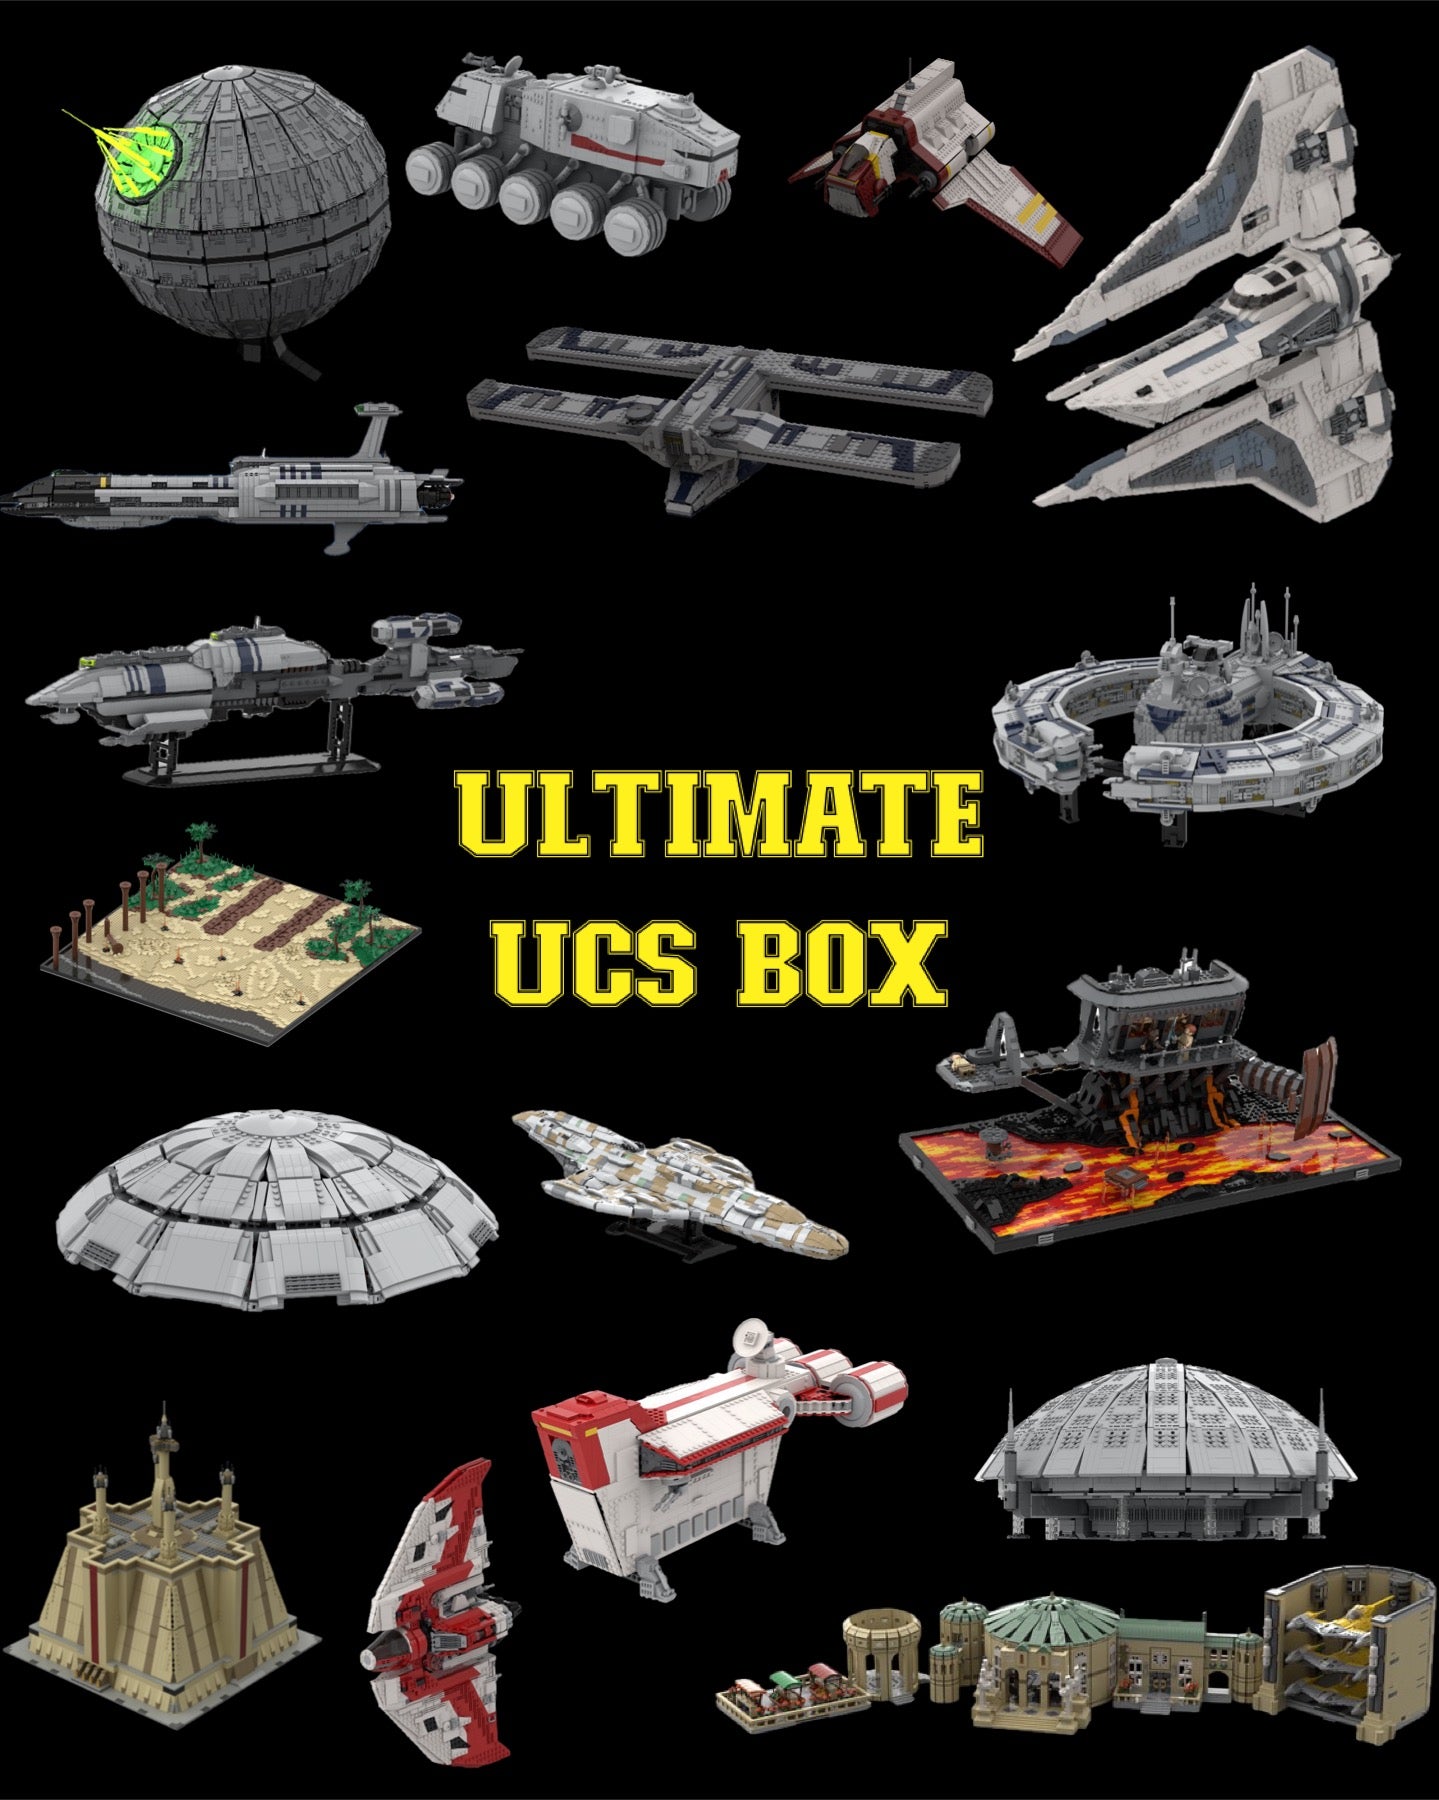 THE ULTIMATE UCS BOX